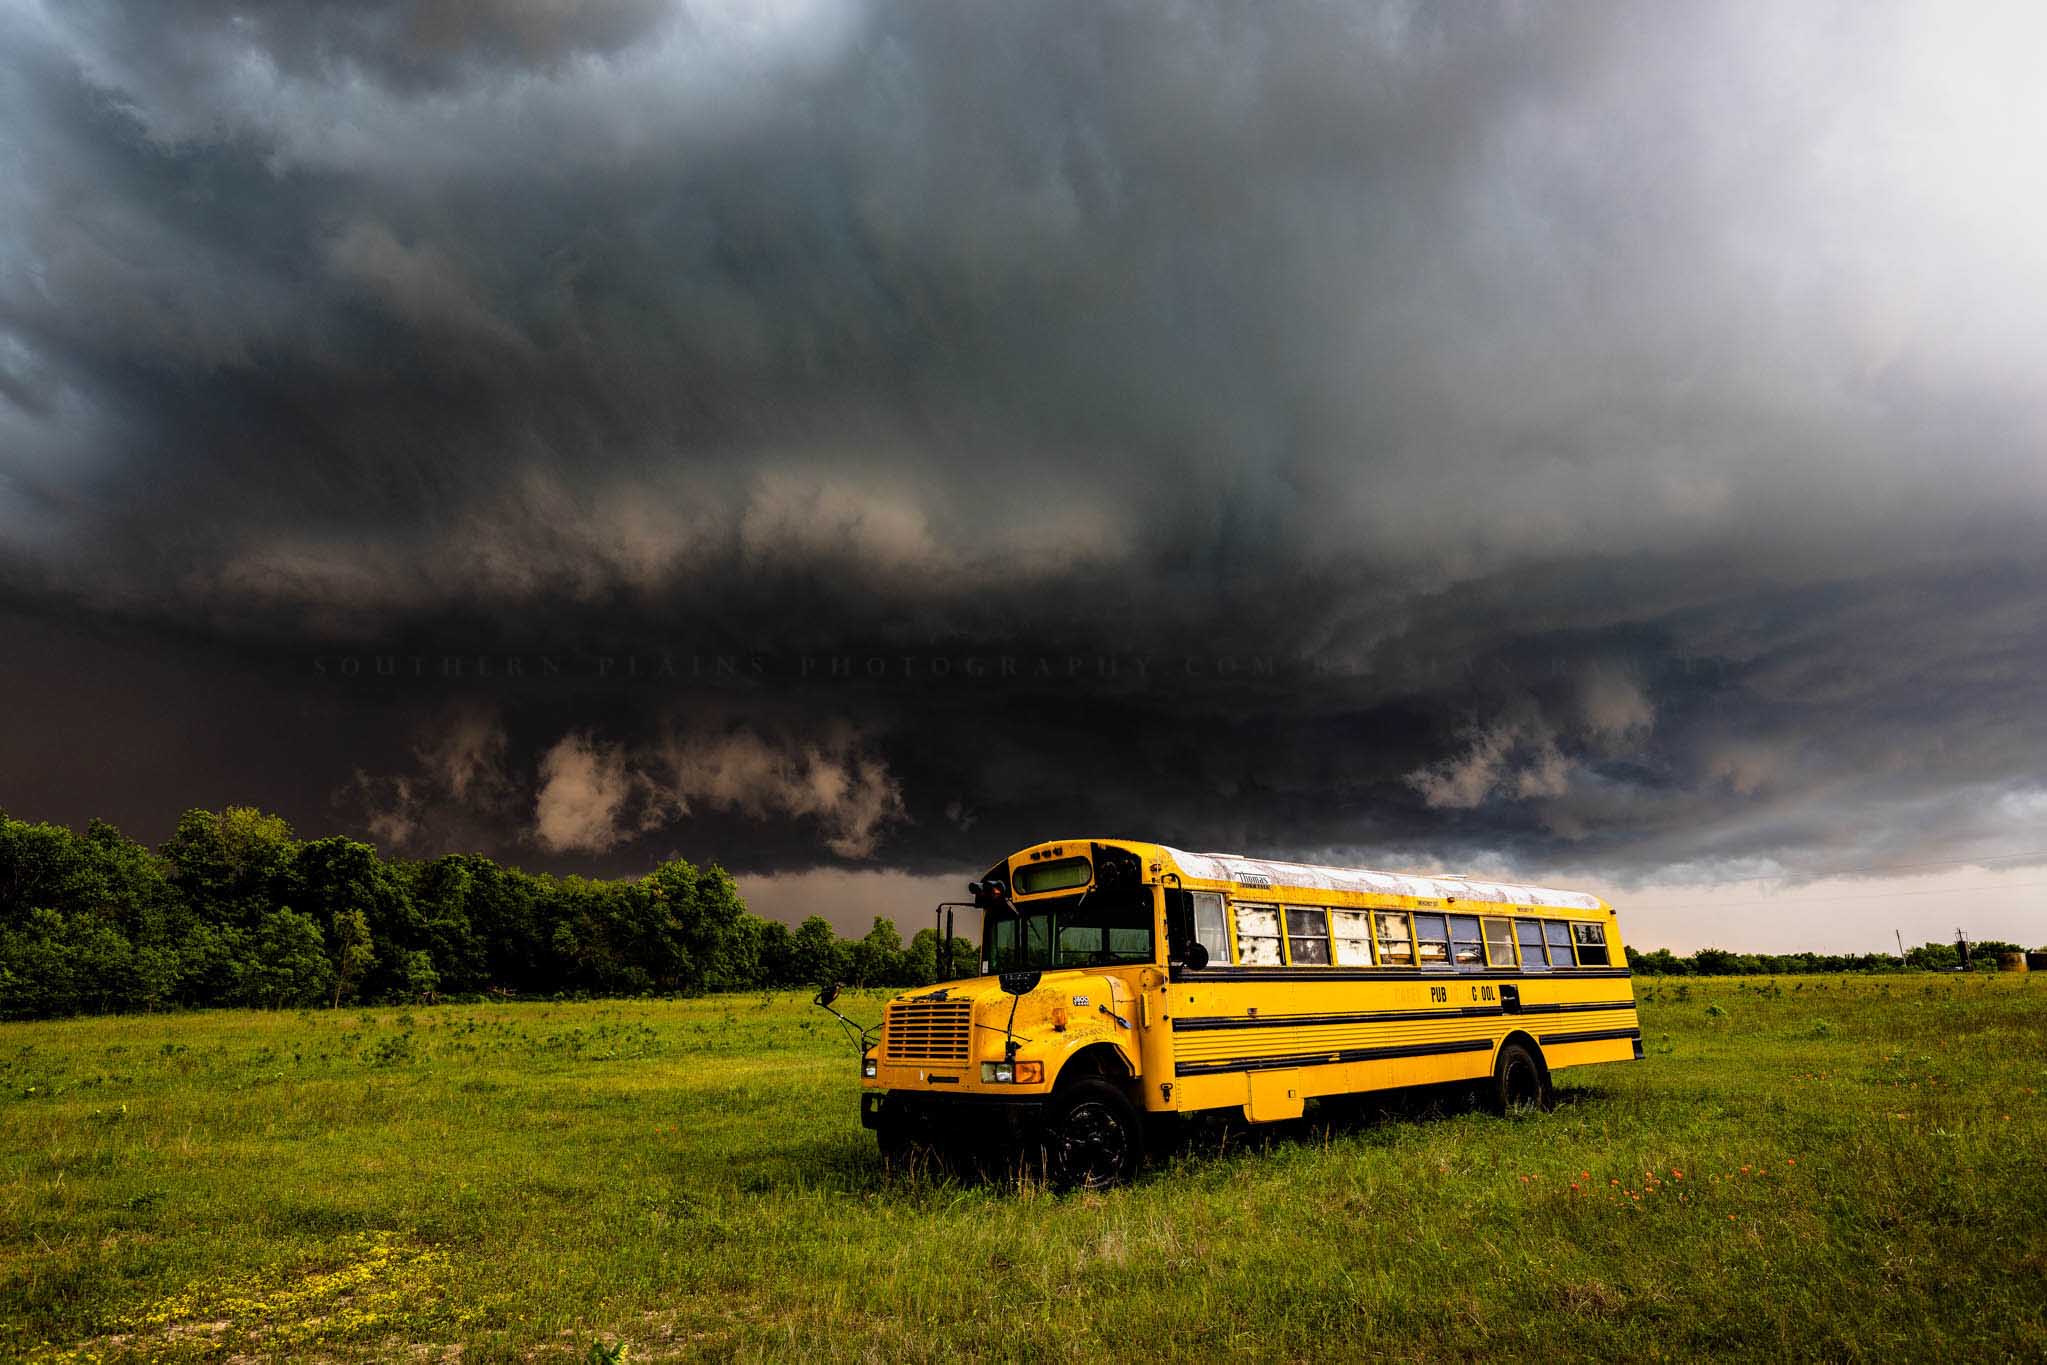 Storm photography print of a thunderstorm advancing over an old school bus on a stormy spring day in Oklahoma by Sean Ramsey of Southern Plains Photography.